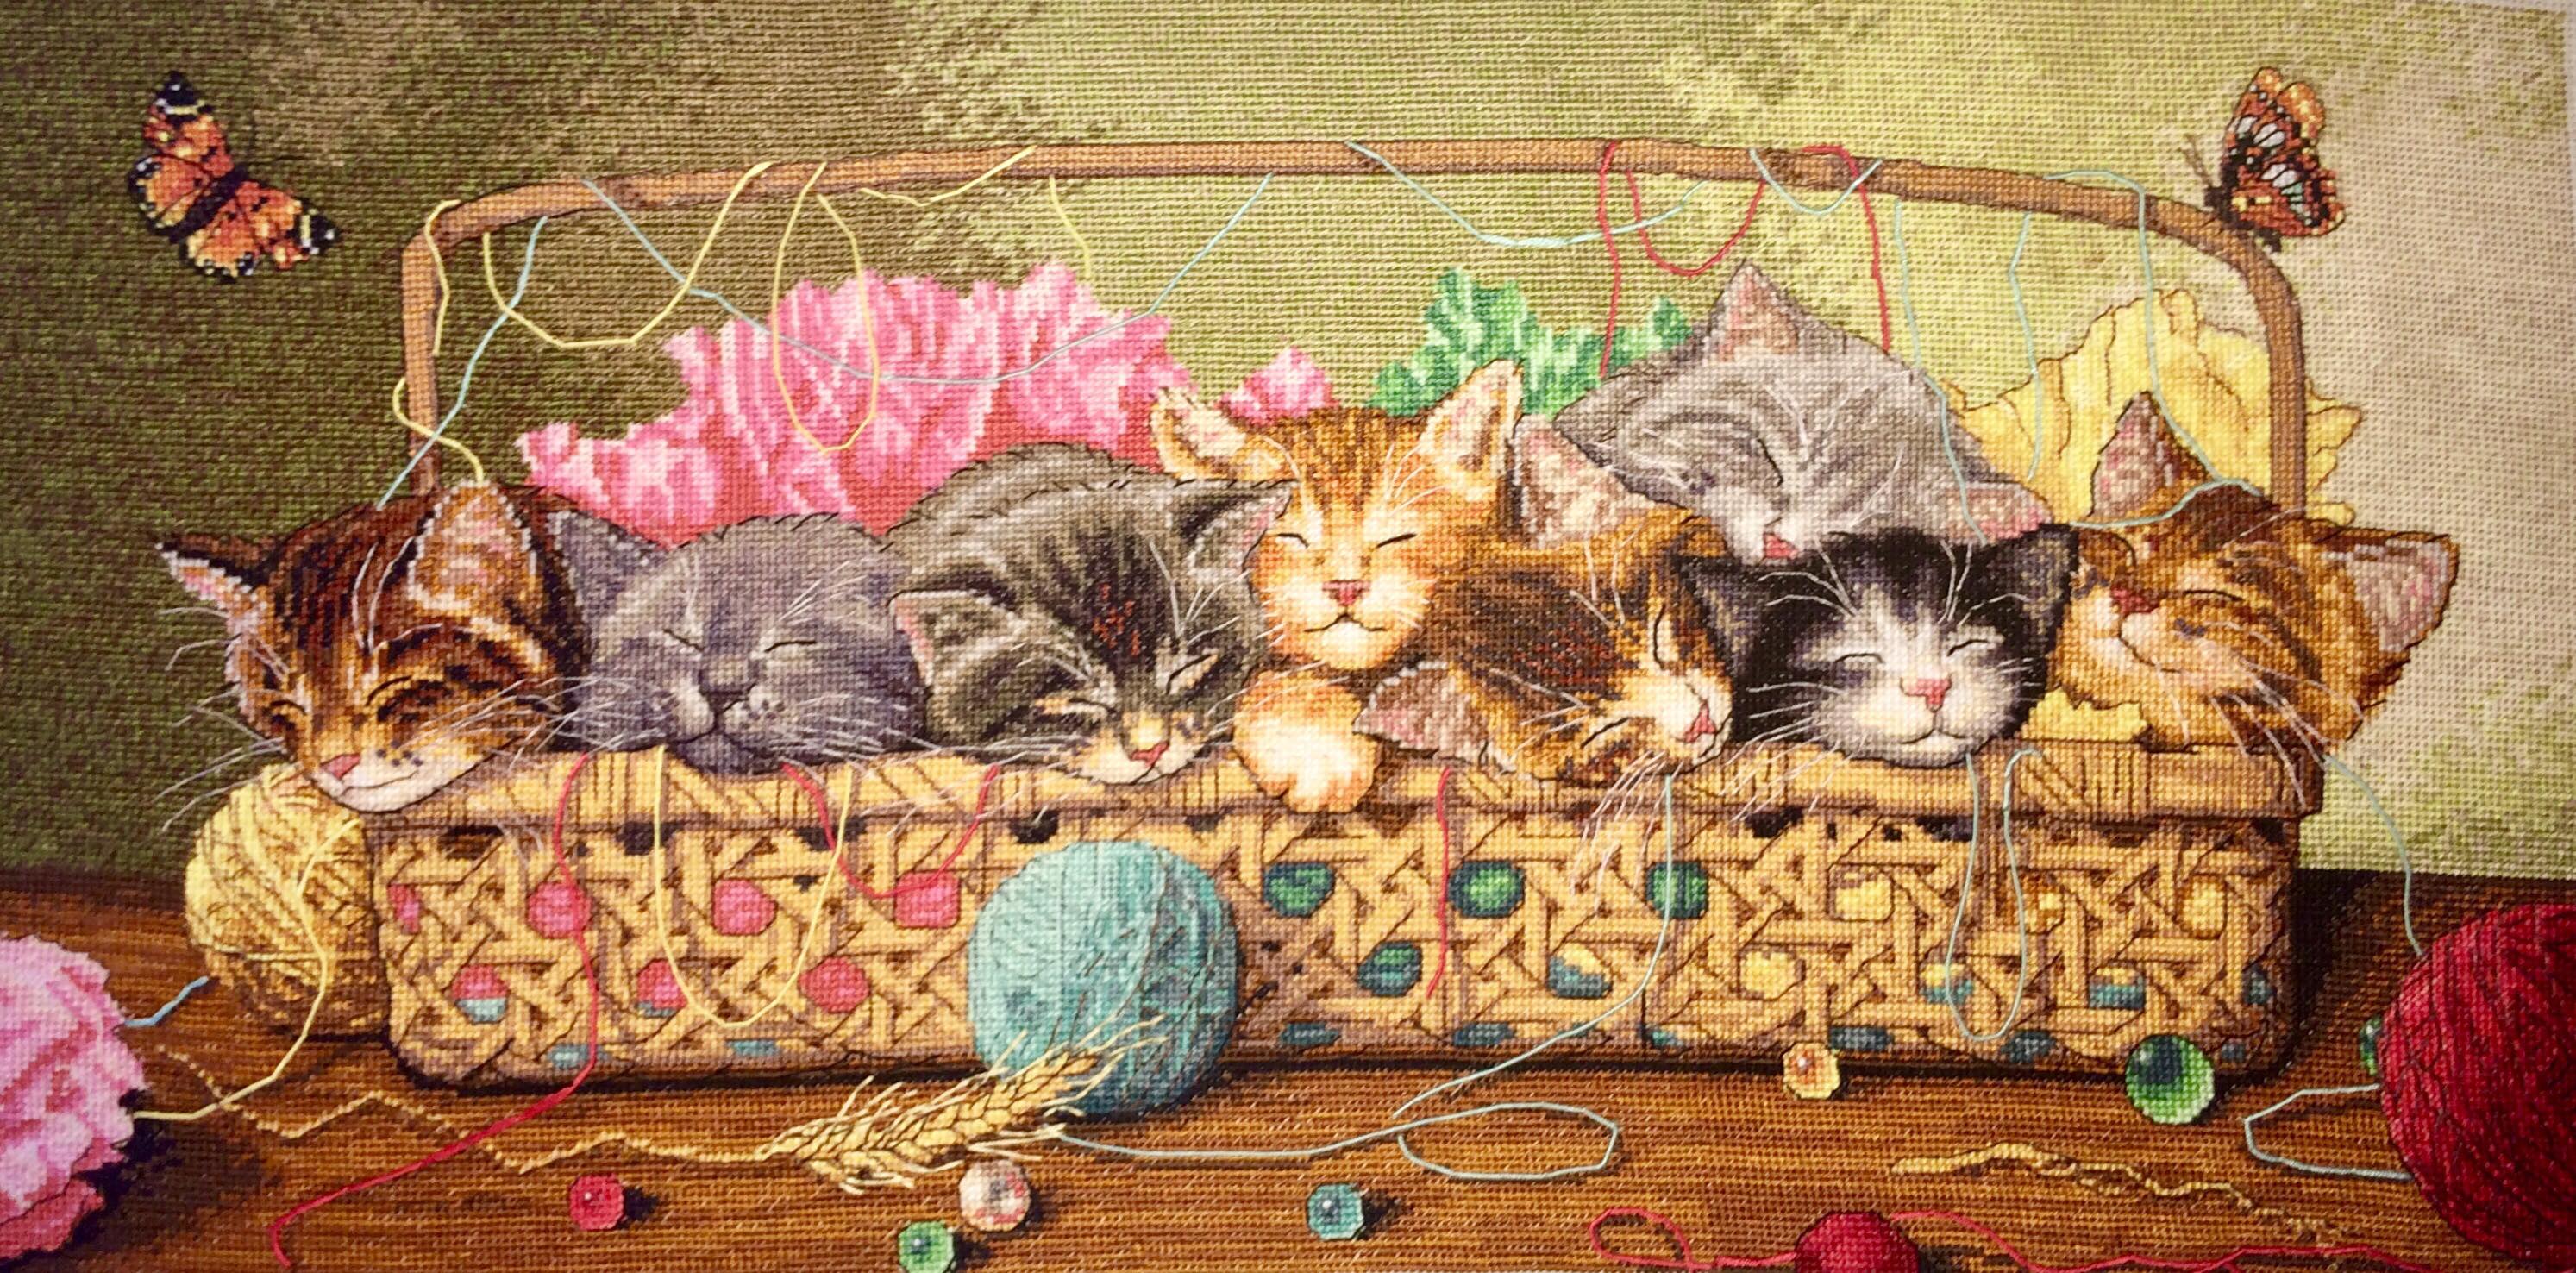 Kitty Litter Dimensions Gold Relax and Stitch Designs Completed Cross Stitch